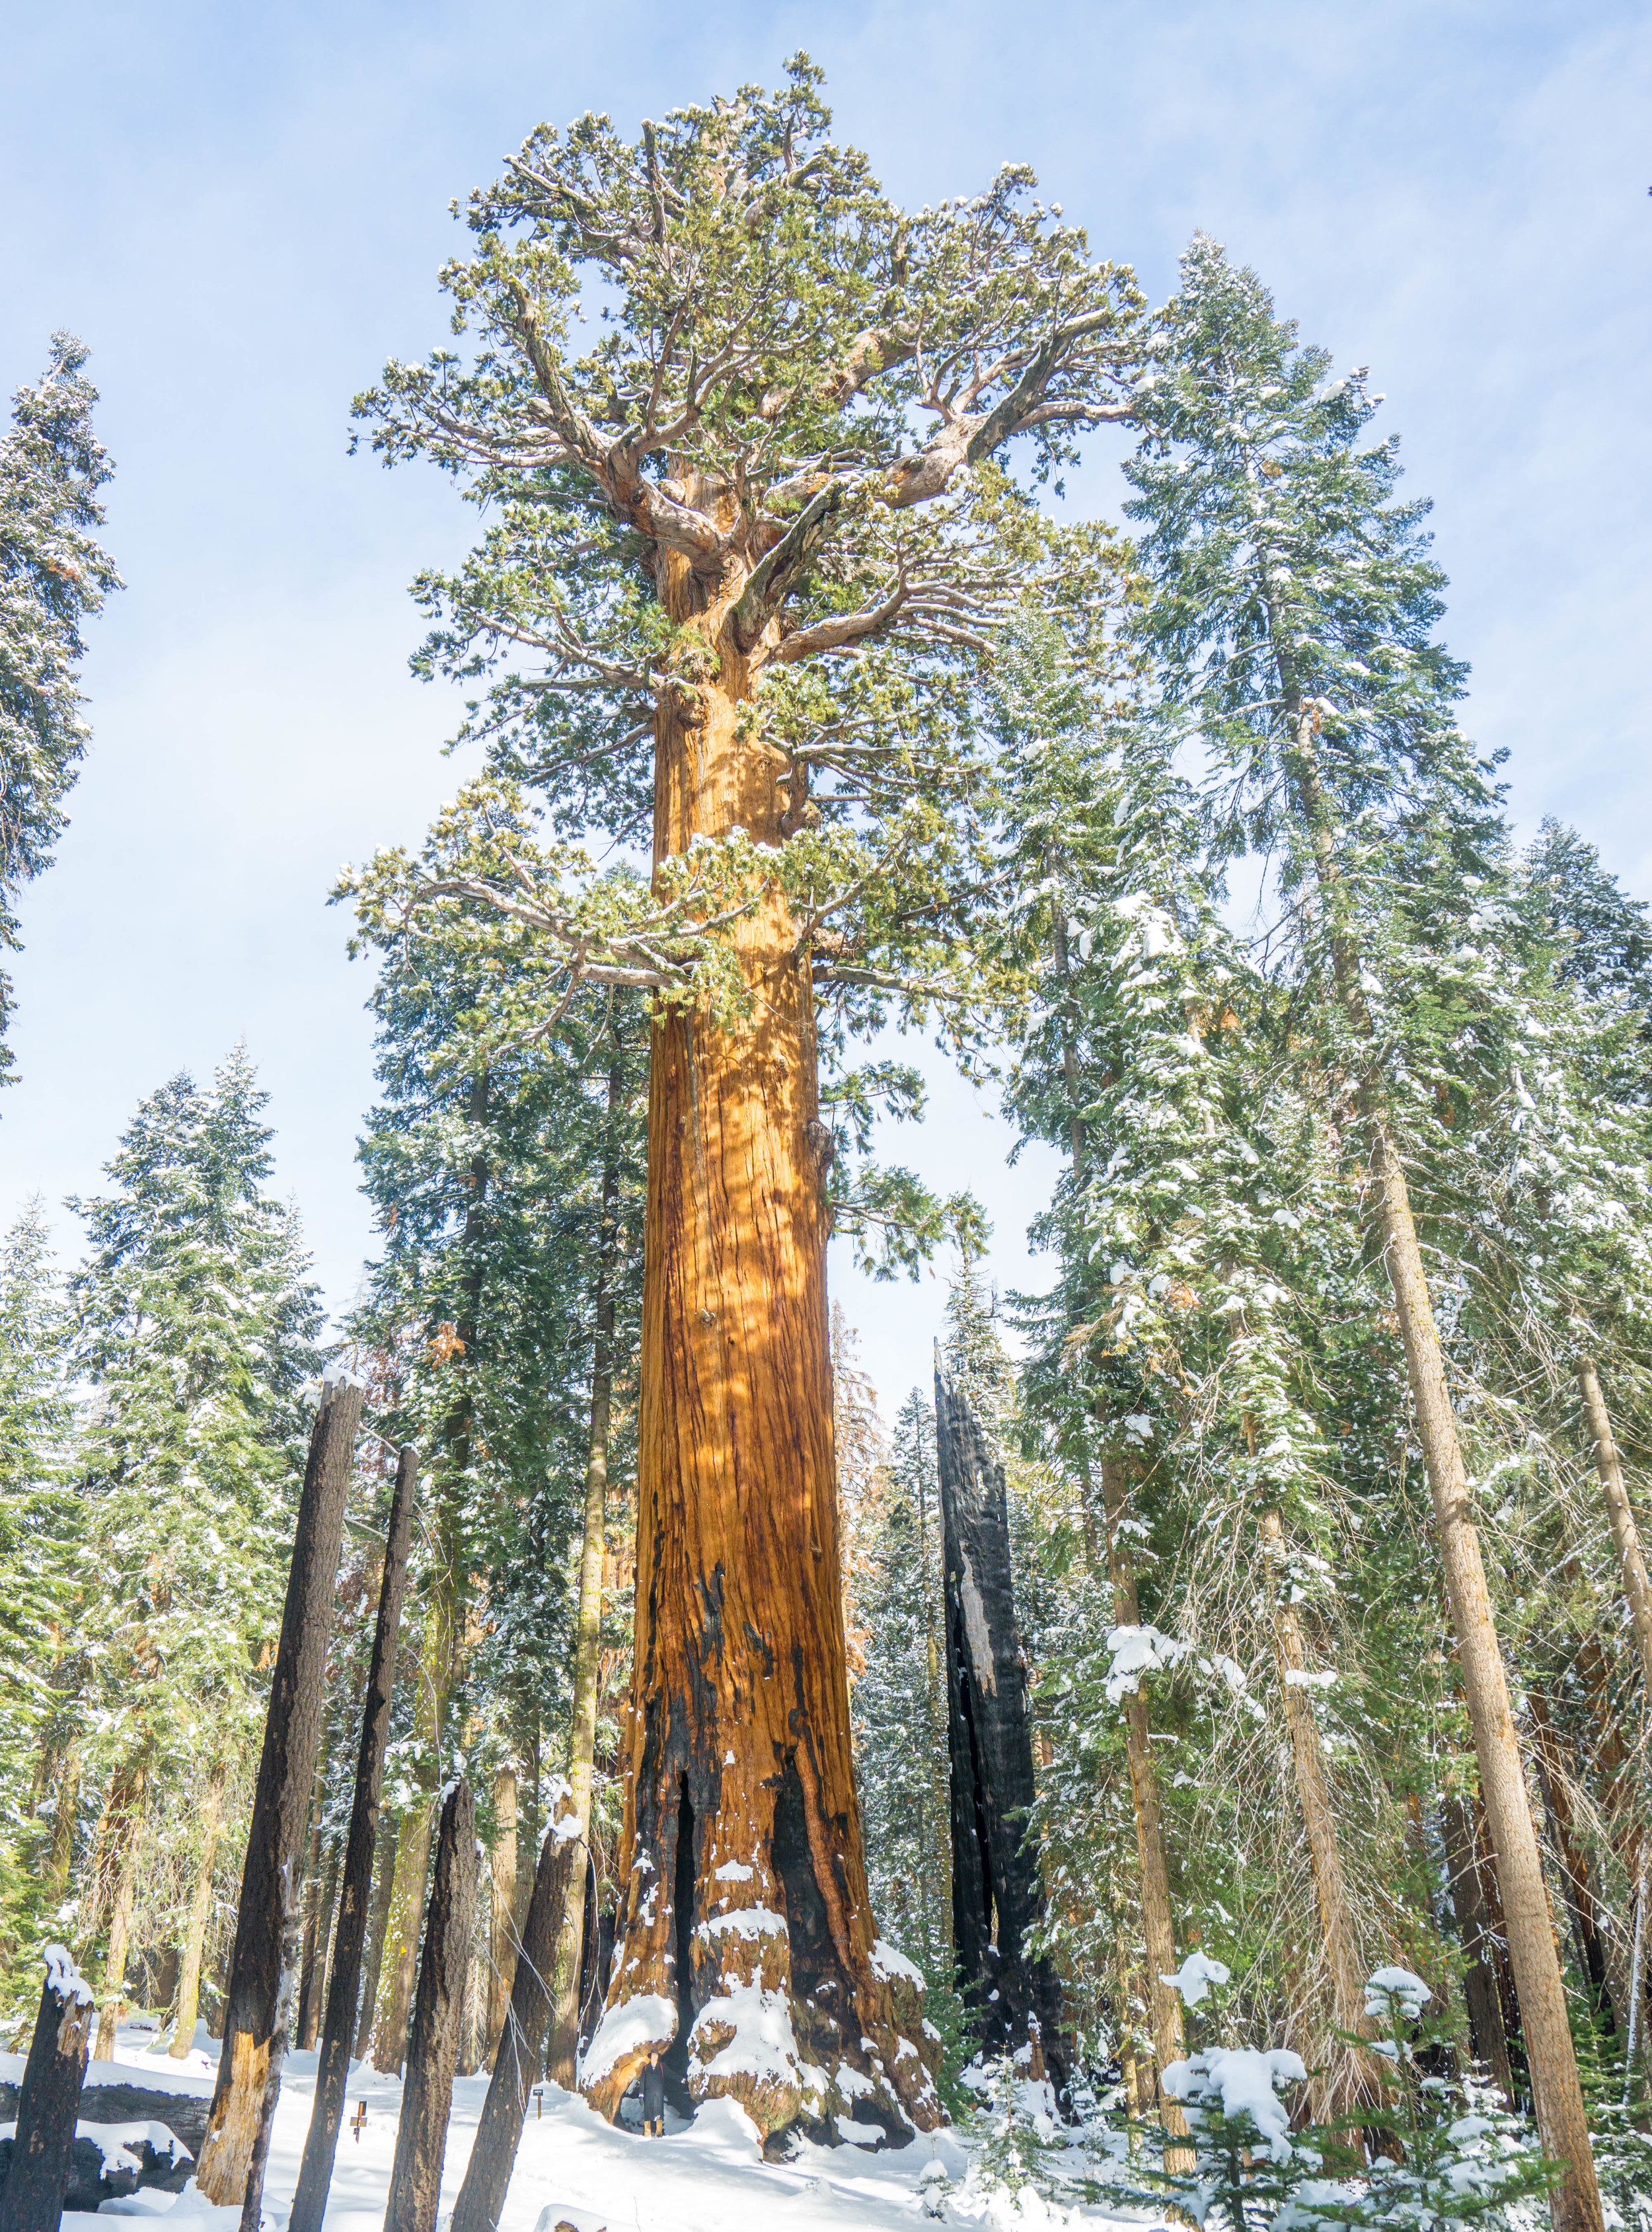 Alas we reach the Lincoln Tree, 4th largest in the entire world. Its so massive, even some of its branches alone are bigger than most normal sized trees.